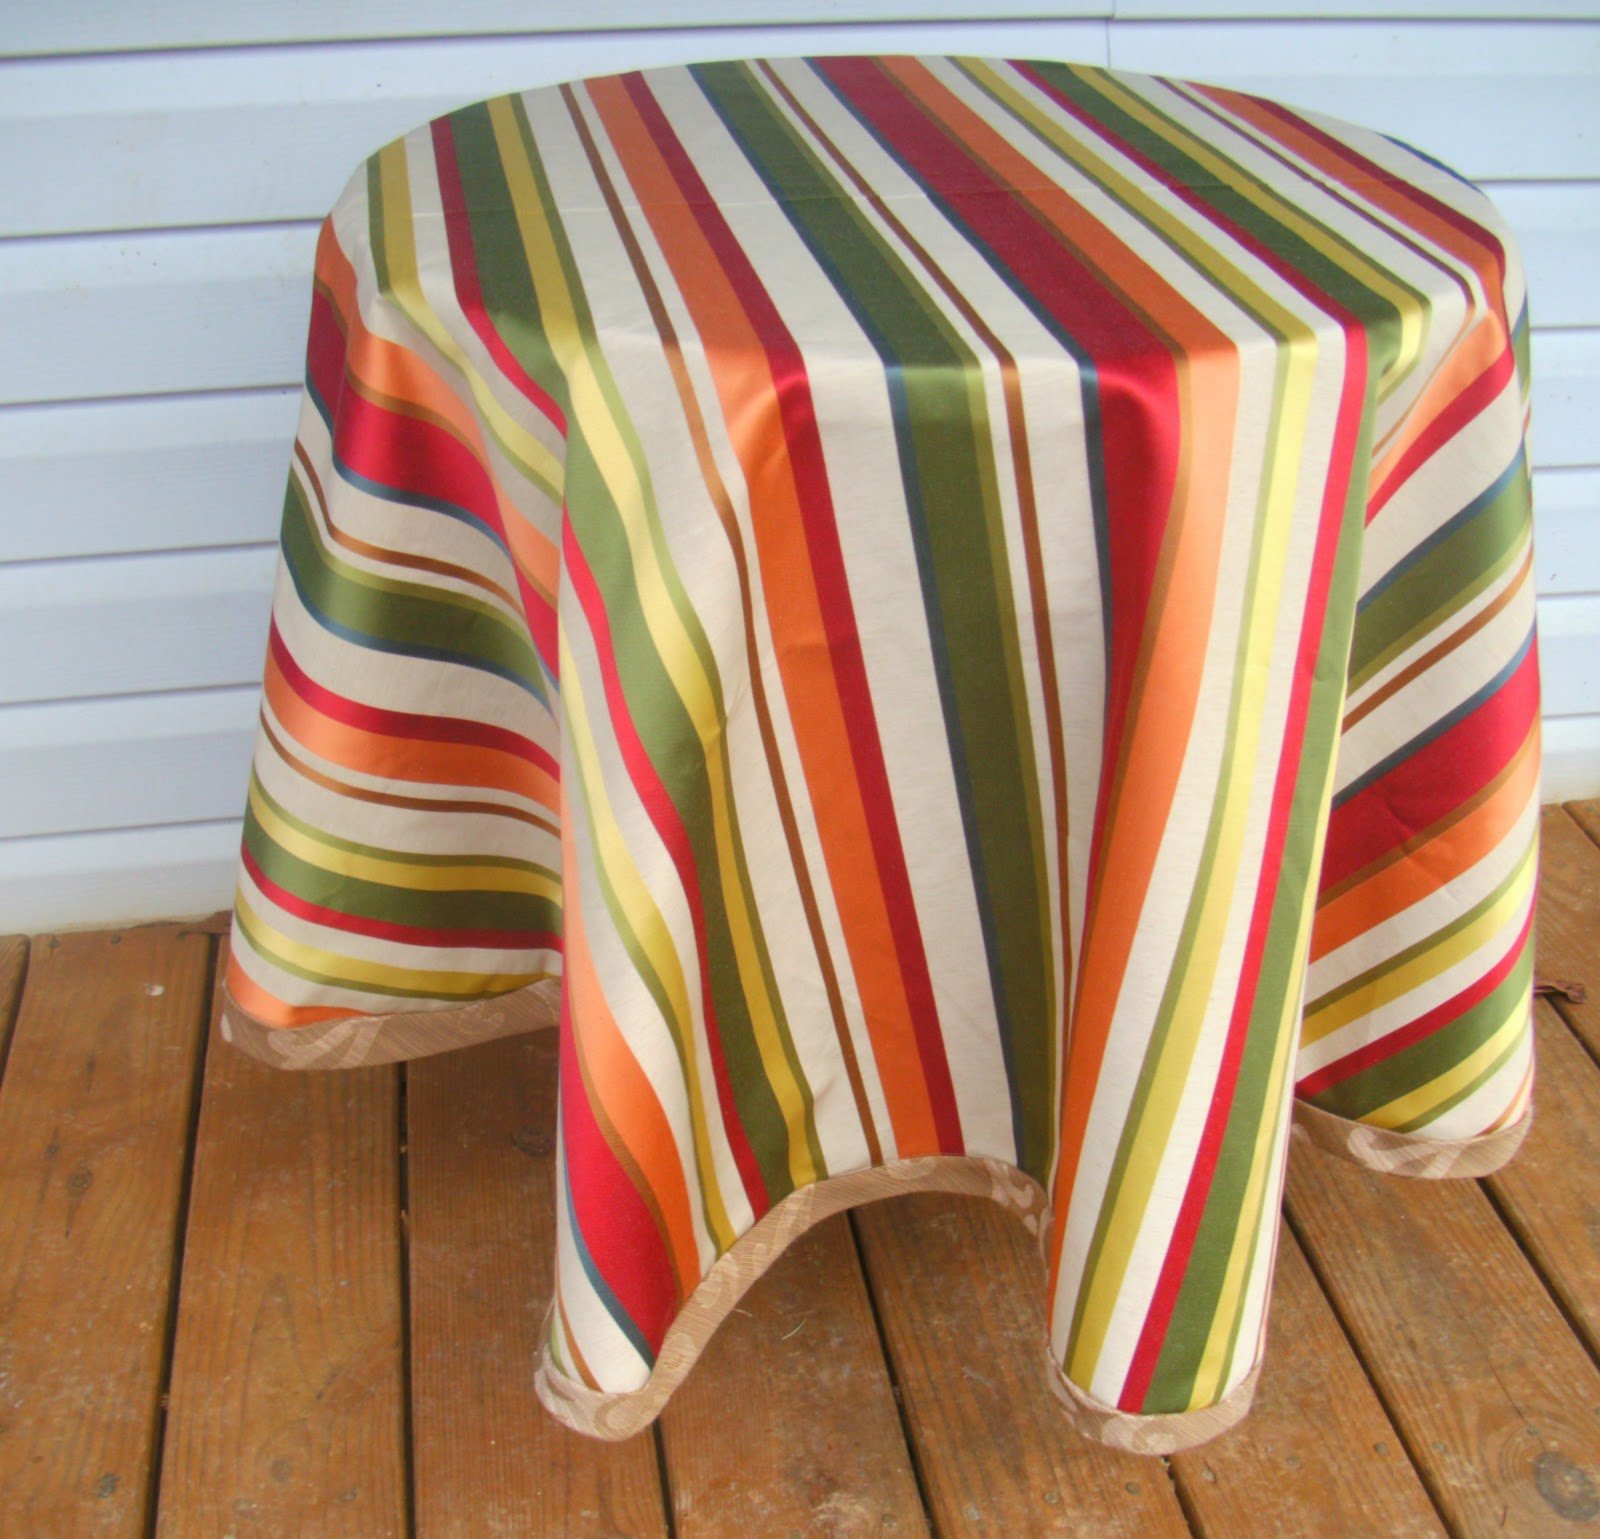 Diy Round Tablecloth Sew Homegrown, How To Make A Round Tablecloth Fit An Umbrella Table